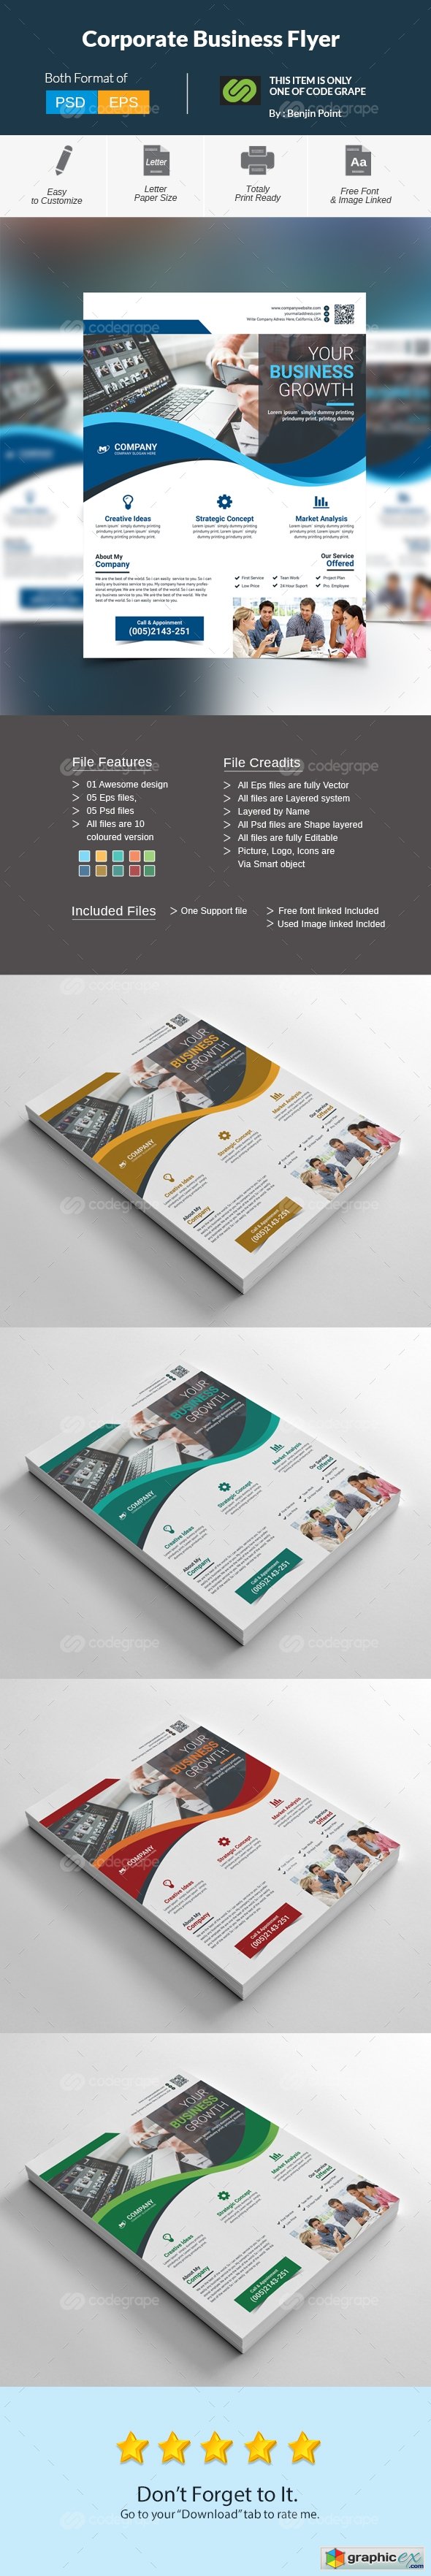 Corporate Business Flyer 10766